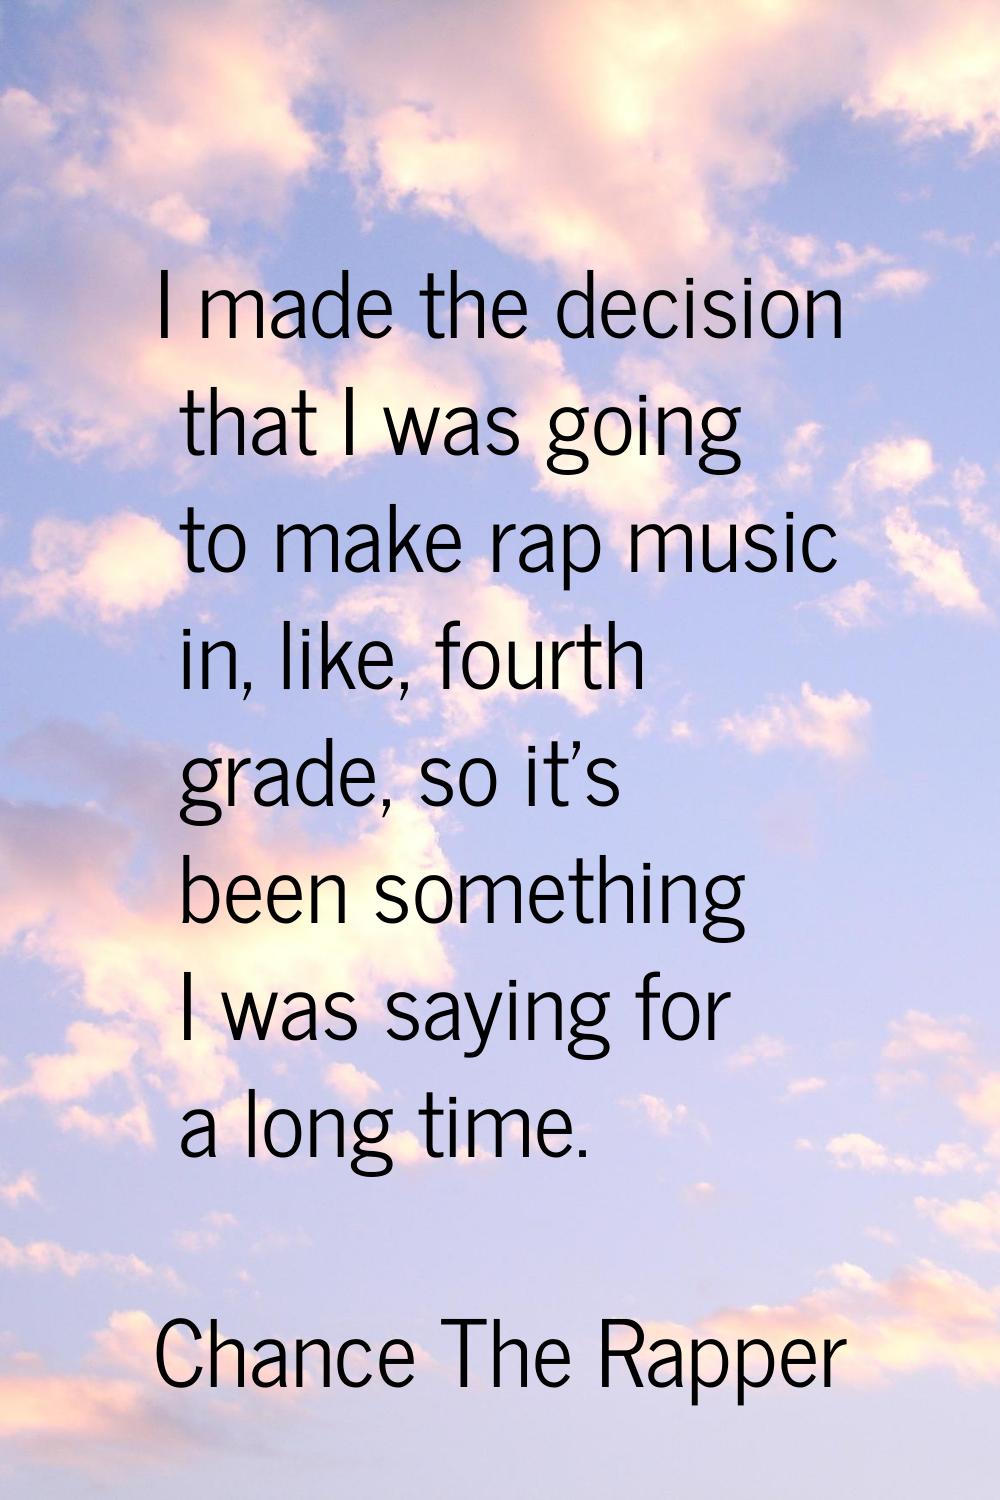 I made the decision that I was going to make rap music in, like, fourth grade, so it's been somethi